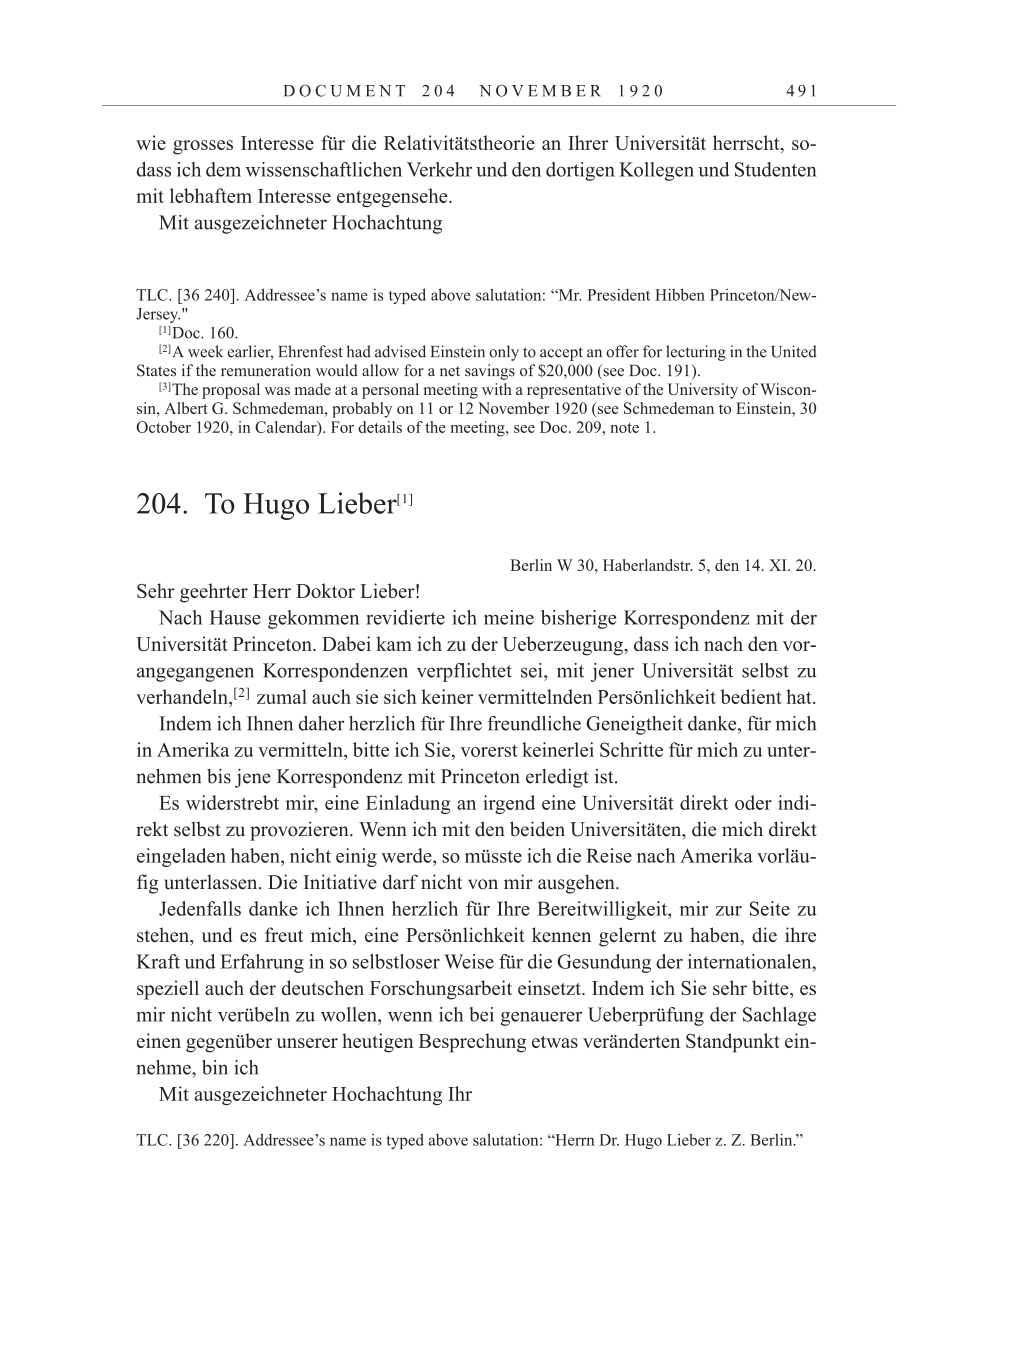 Volume 10: The Berlin Years: Correspondence May-December 1920 / Supplementary Correspondence 1909-1920 page 491